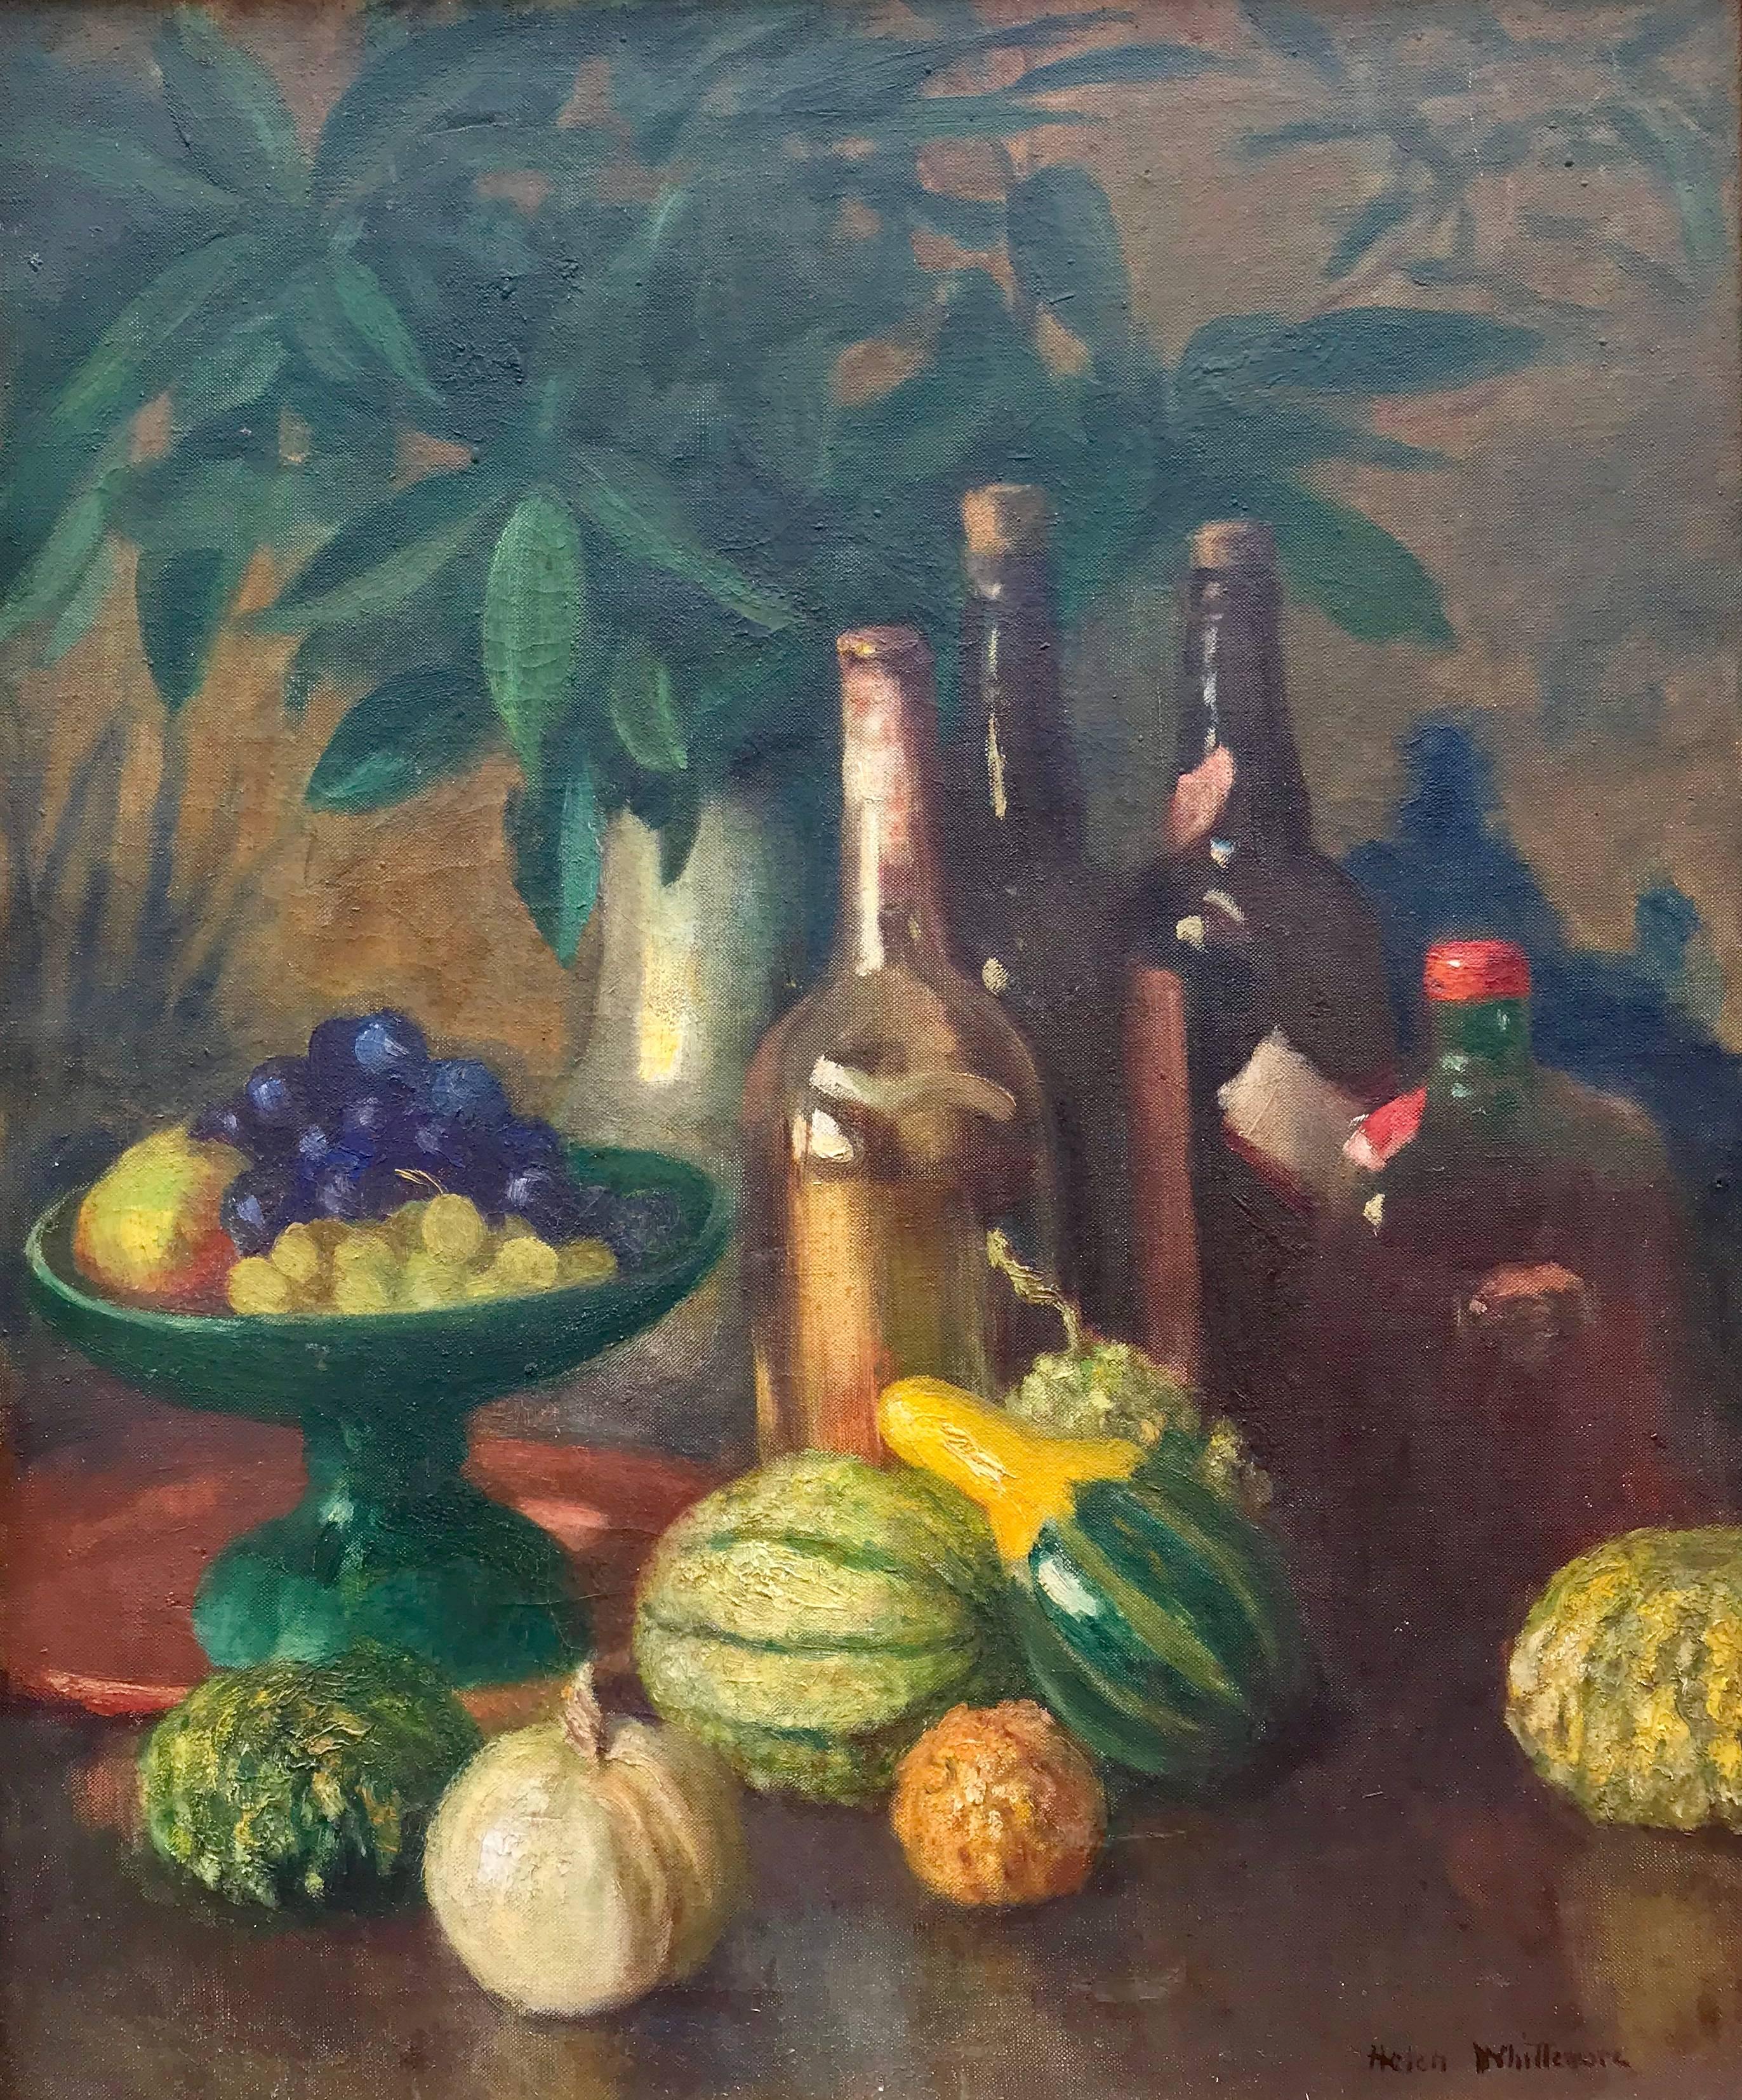 Helen Whittemore Still-Life Painting - "Still Life with Wine"